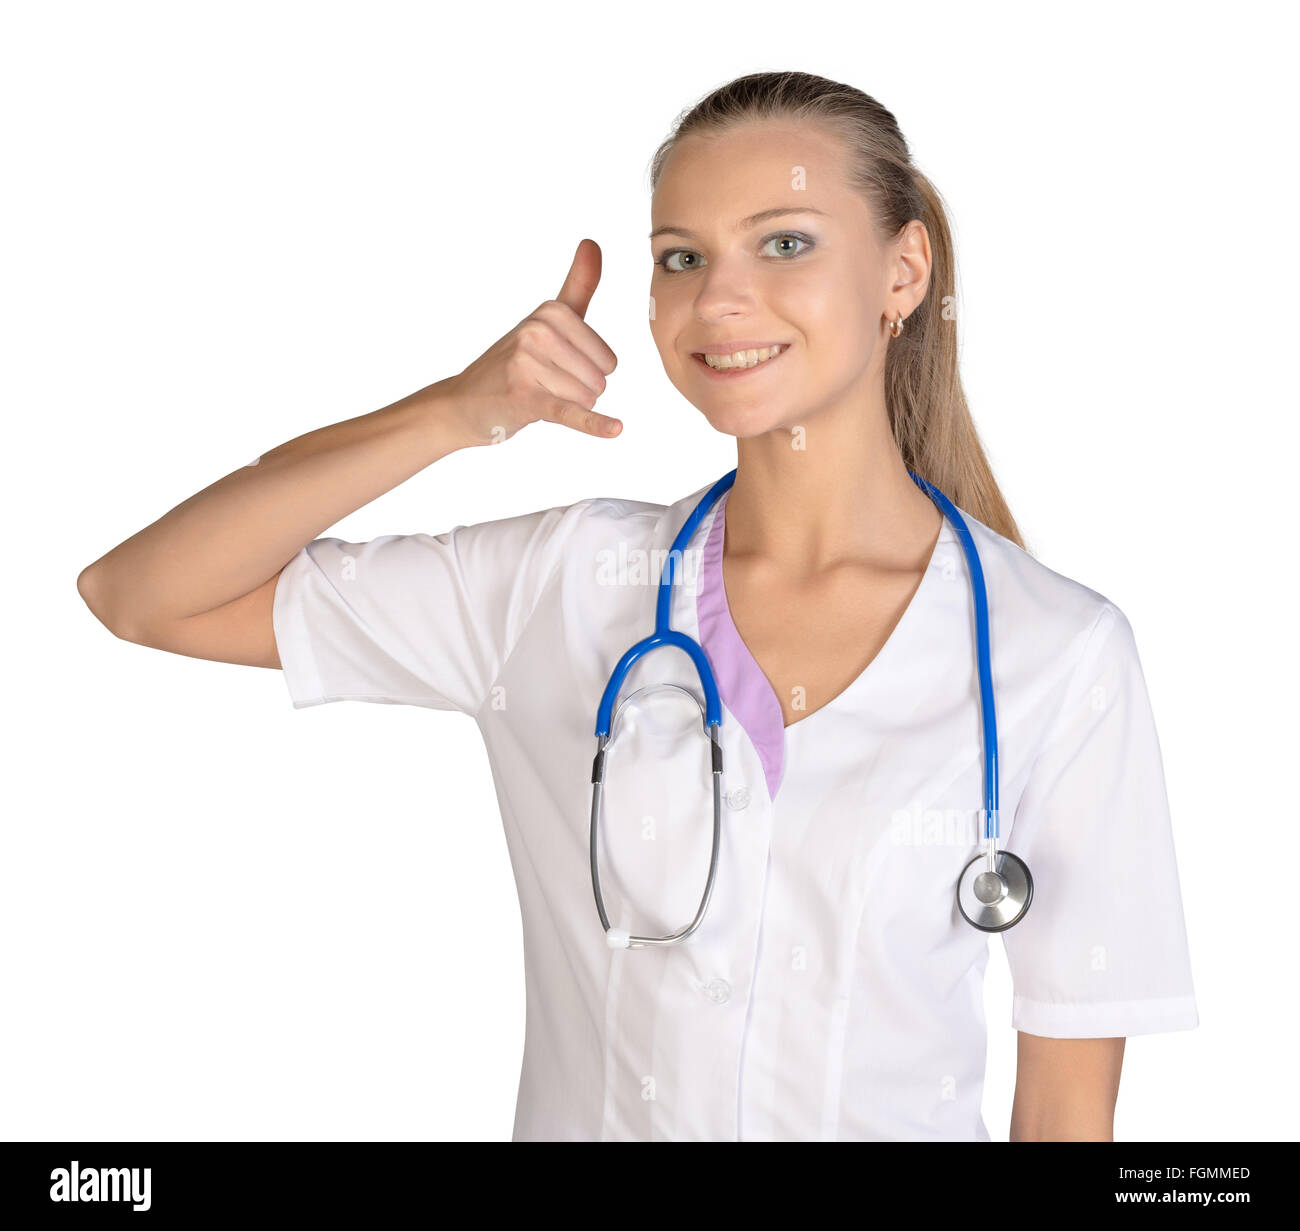 Young female doctor showing hand sign call on white background Stock Photo